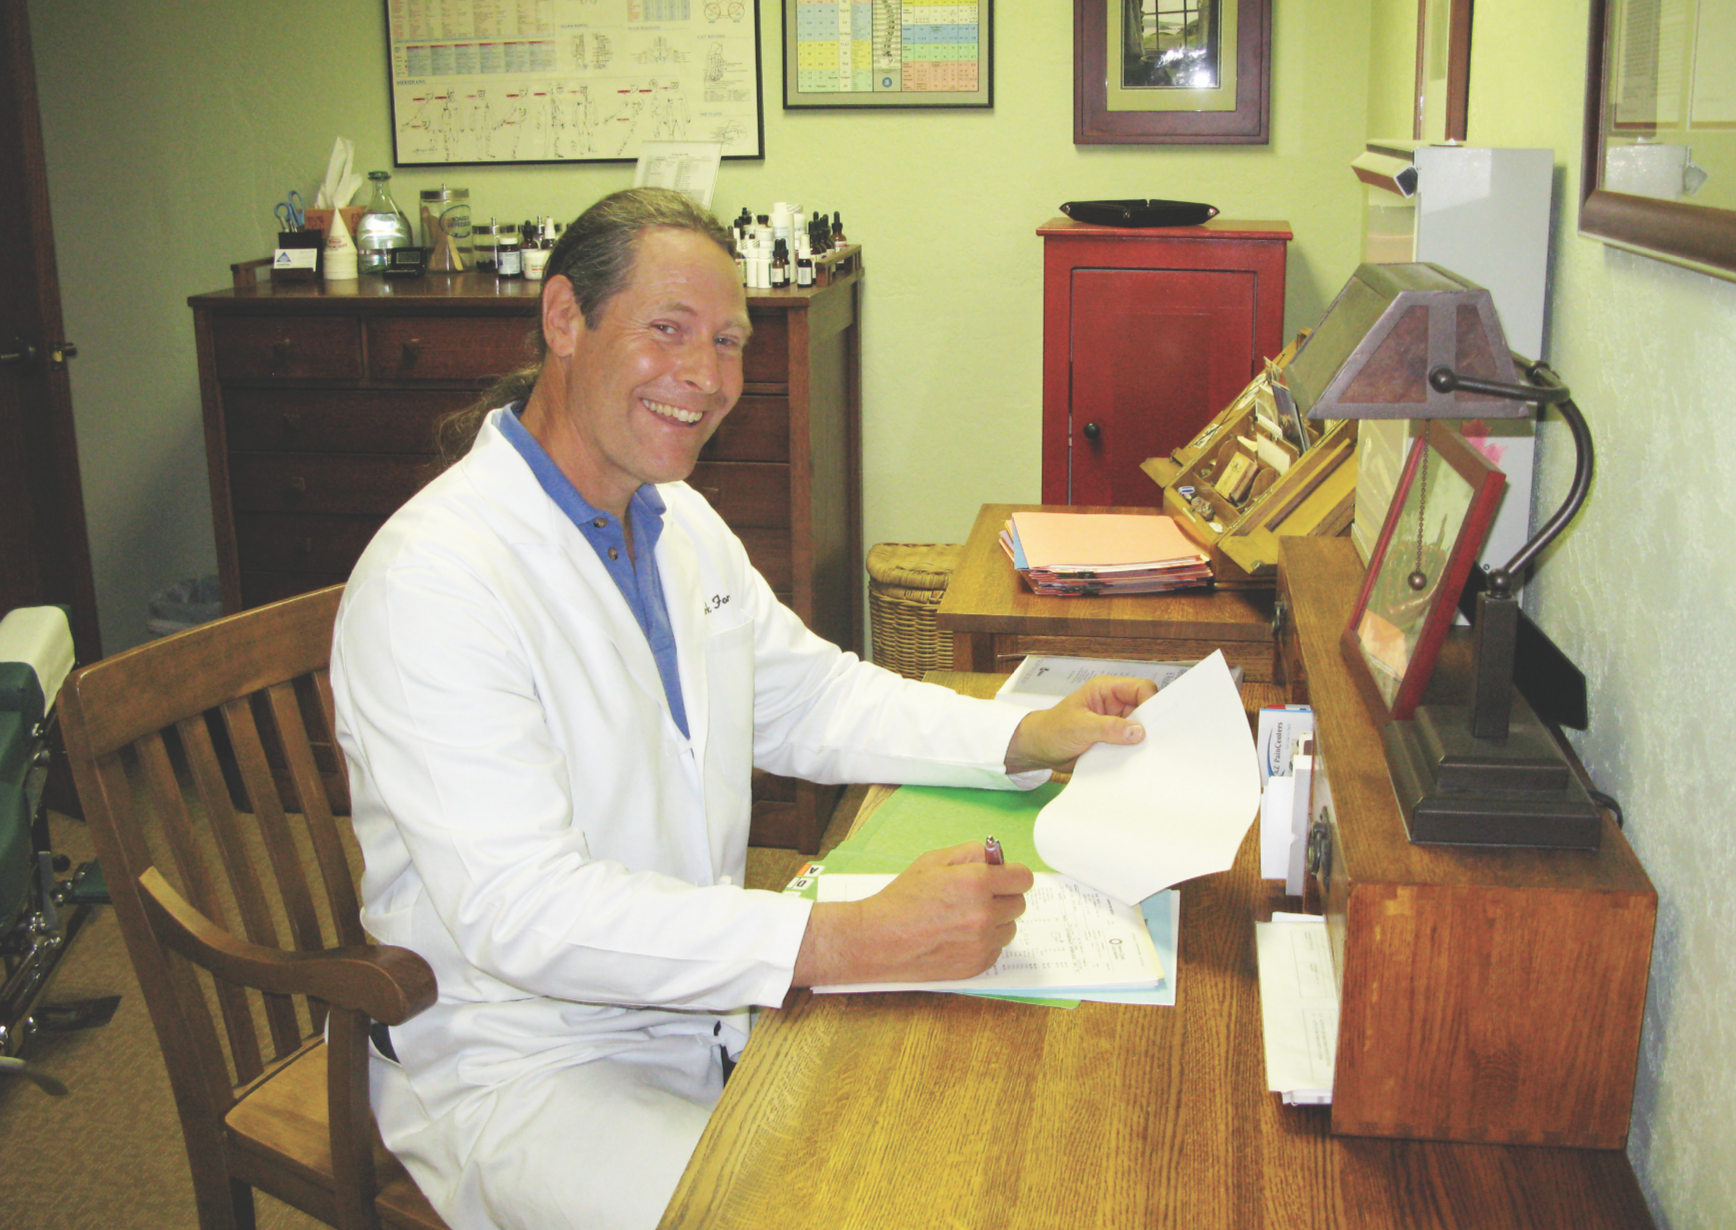 Dr. Mark Force The Heart of Practice… and How We Heal